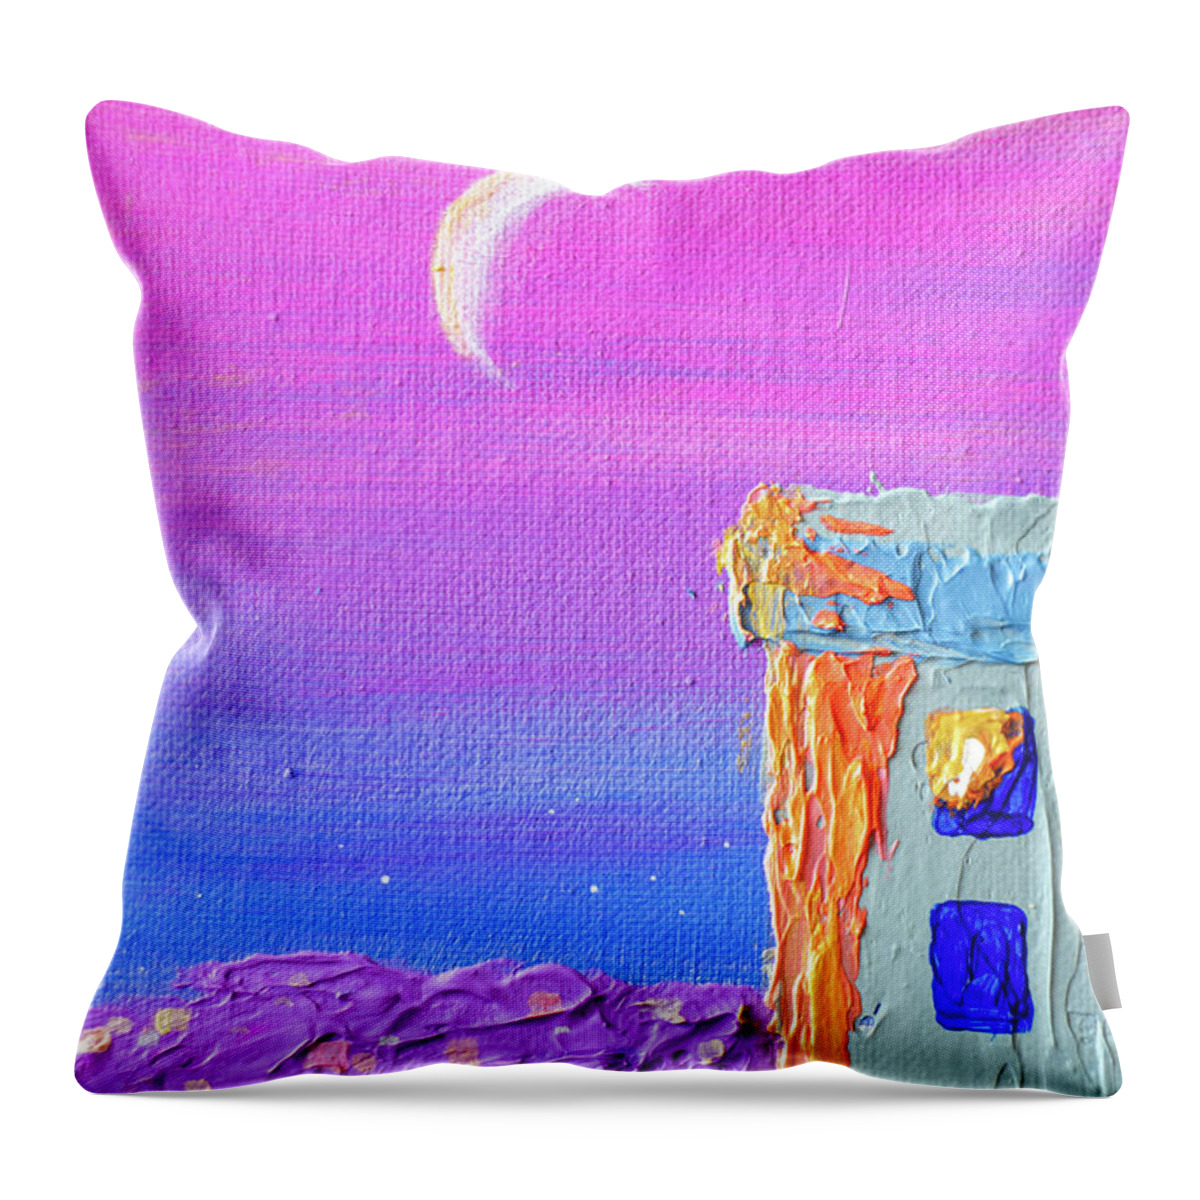 Landscape Throw Pillow featuring the painting Daniela's Sunrise Fragment by Ashley Wright